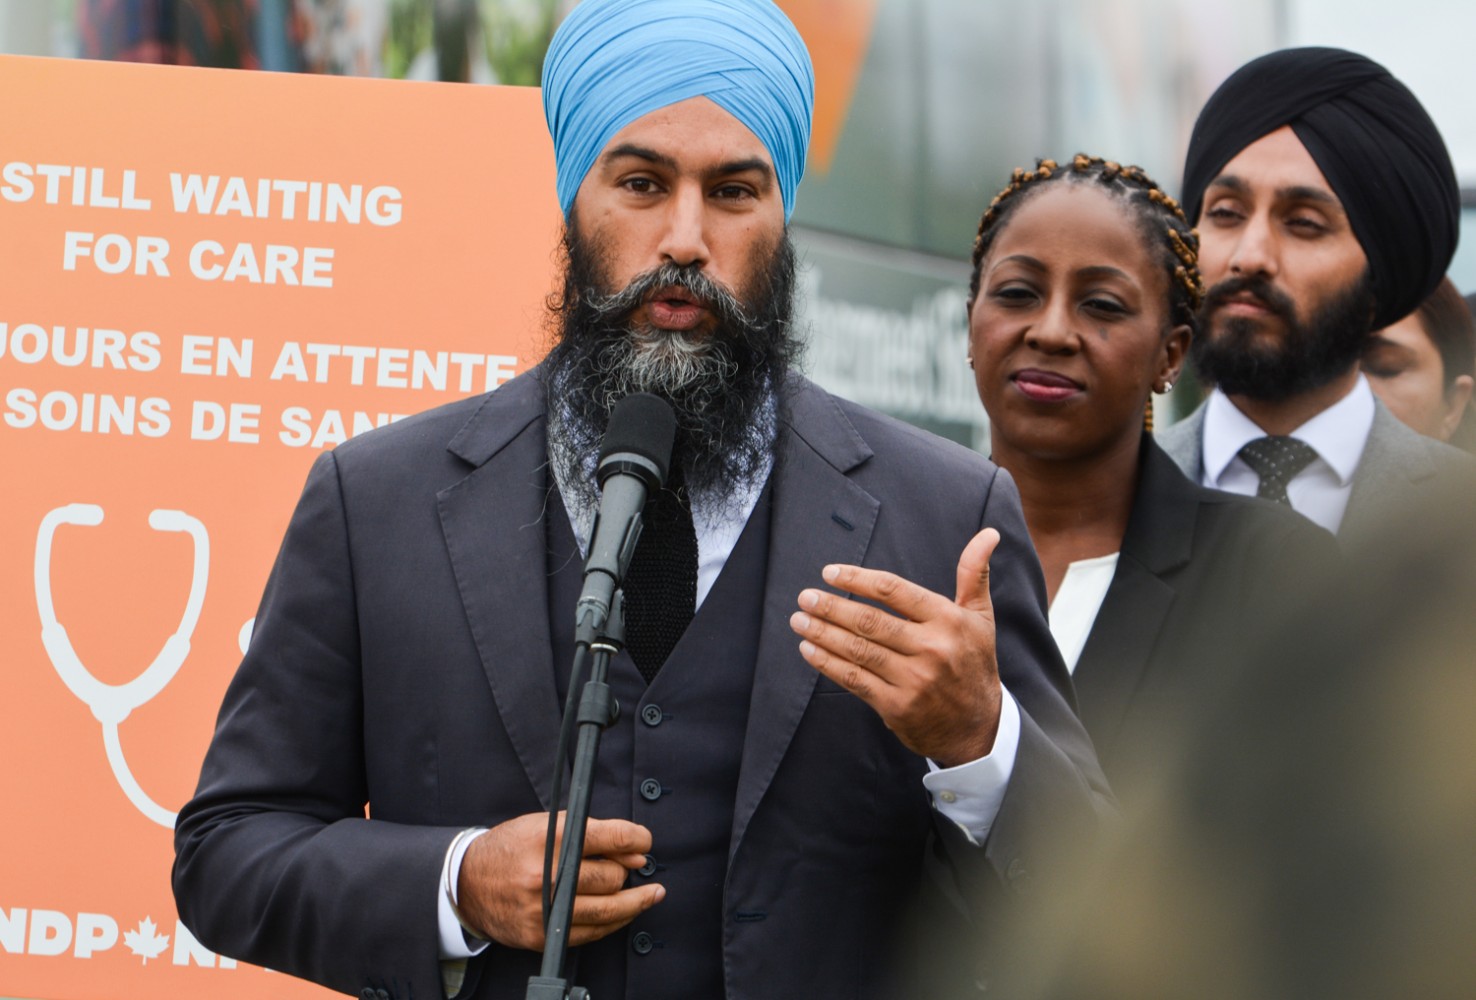 NDP commit to funding a new hospital in Brampton, alongside pharmacare for all Canadians